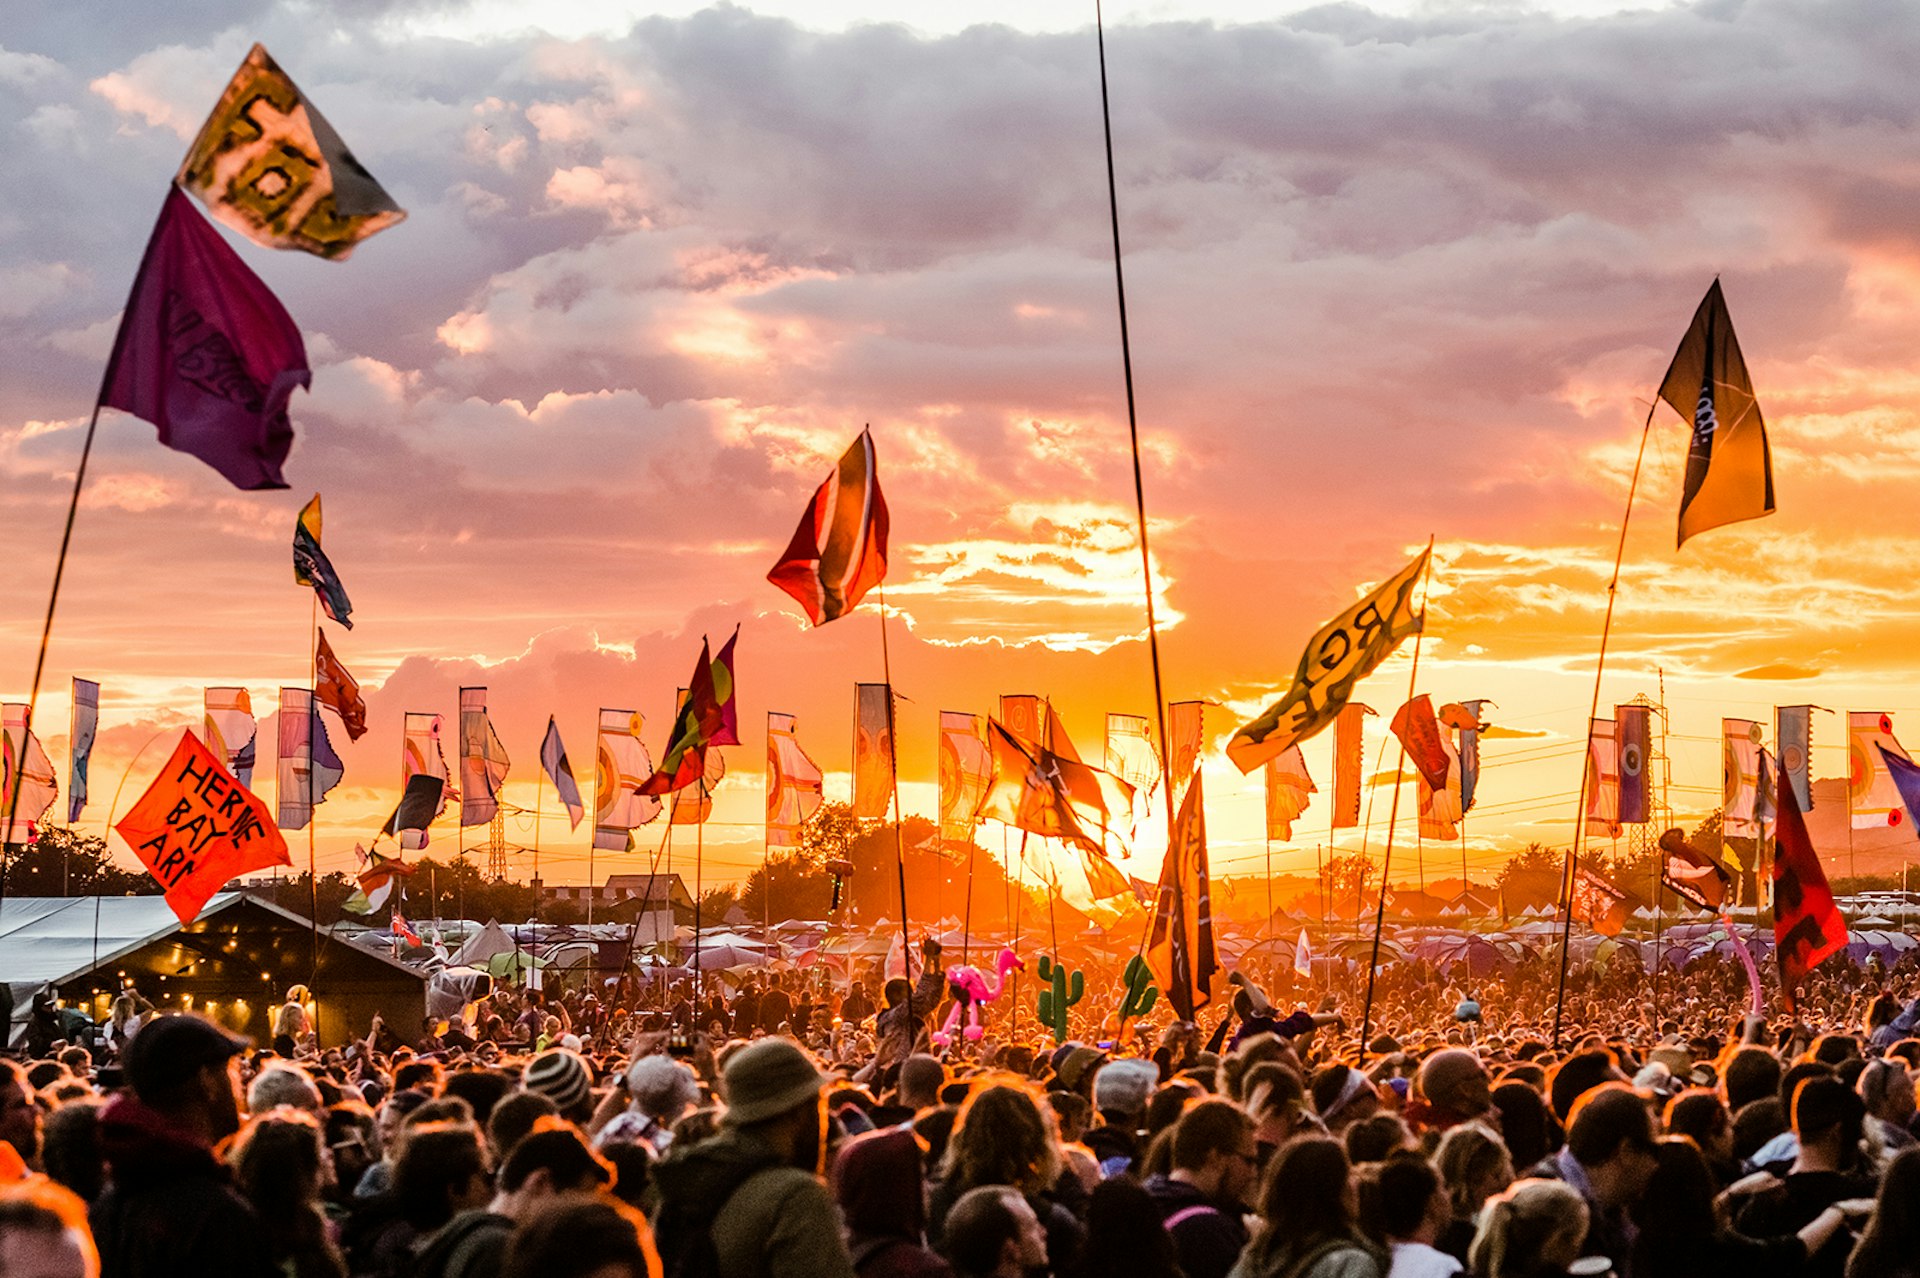 A crowd at sunset at the Glastonbury Festival @ Andrew Allcock / Glastonbury Festival